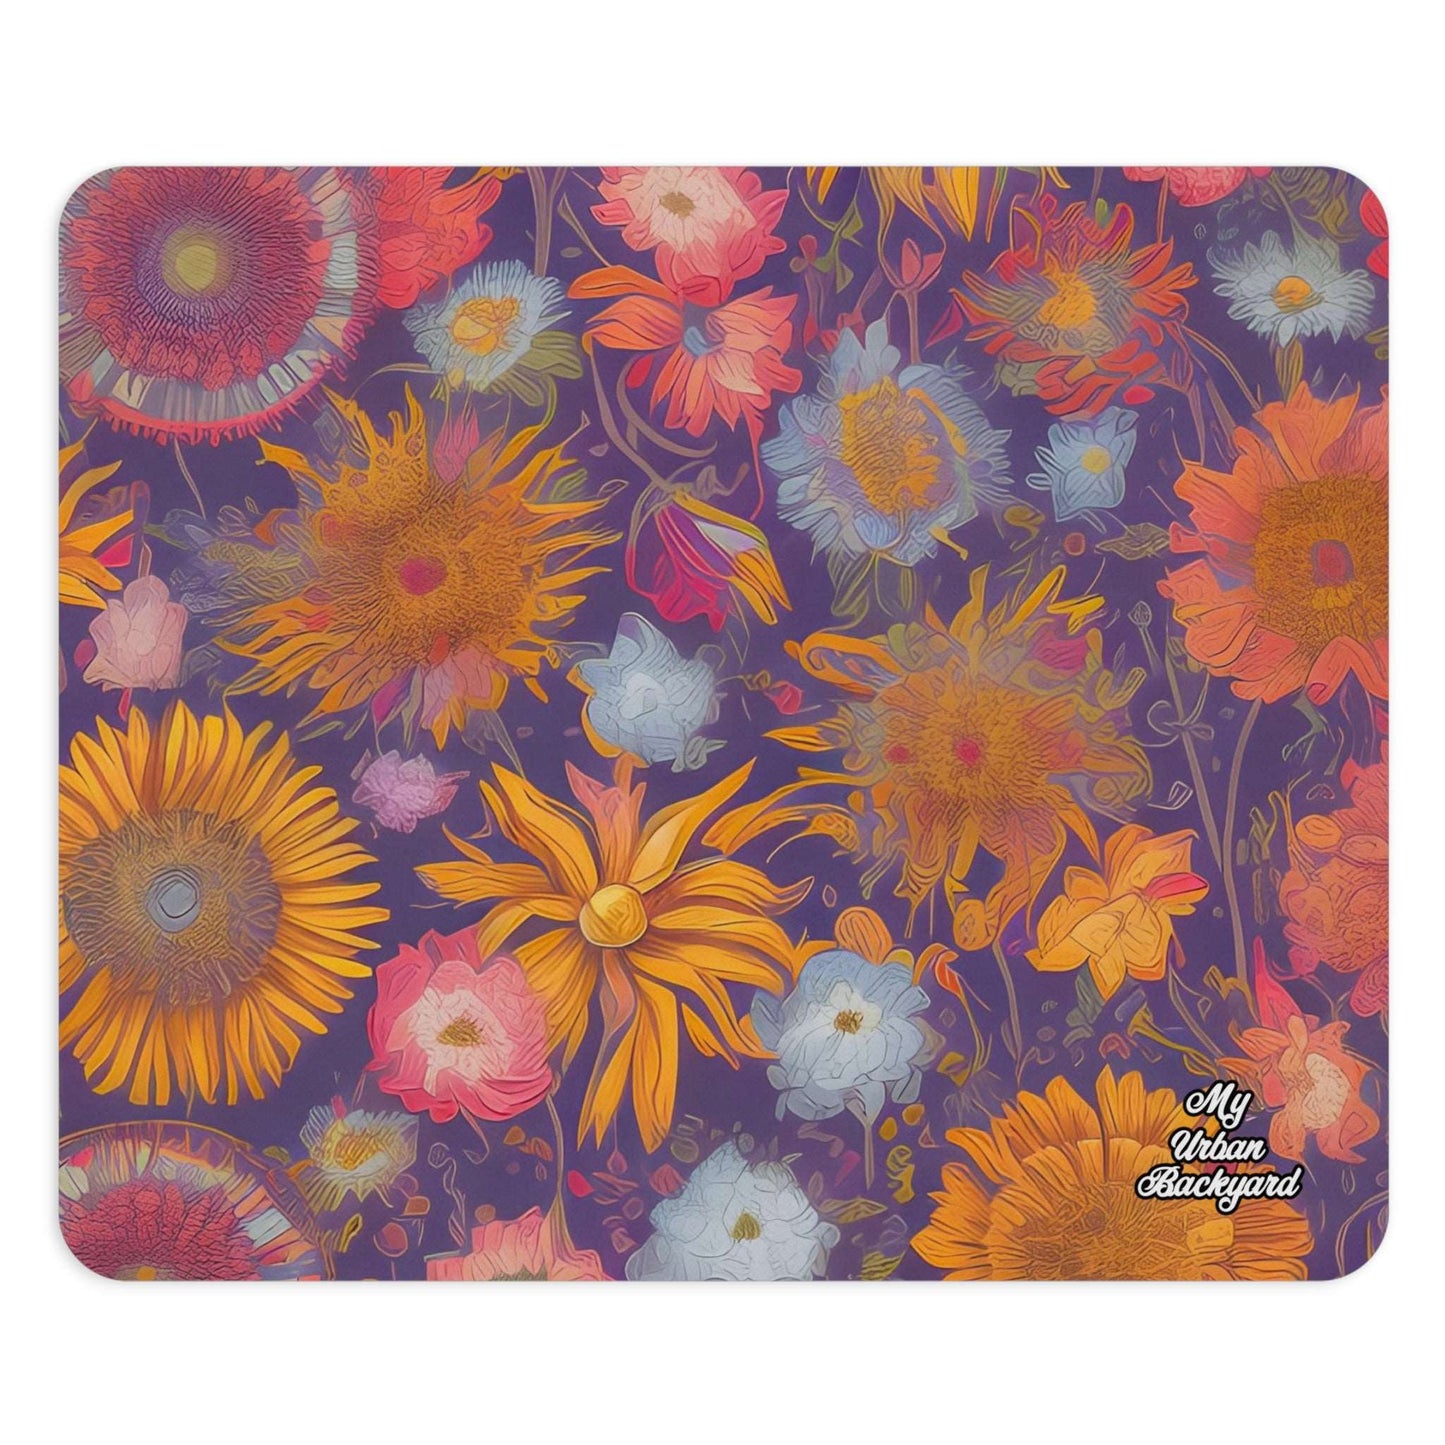 Computer Mouse Pad, Non-slip rubber bottom, Abstract Flowers